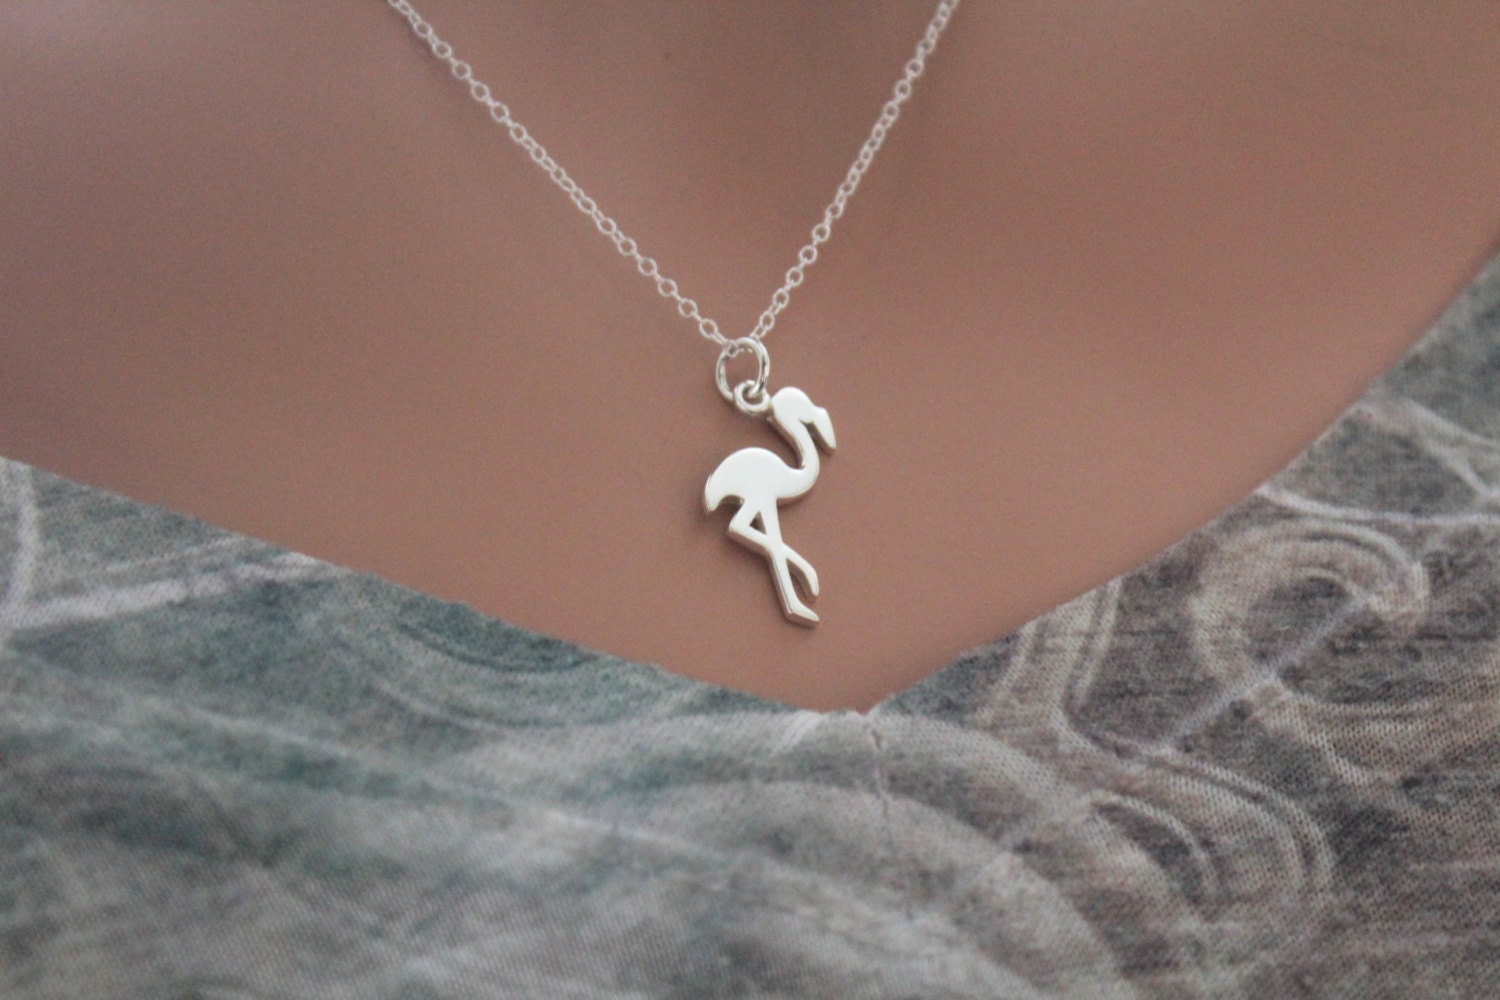 New .925 Sterling Silver Flamingo Bird Pendant Necklace 